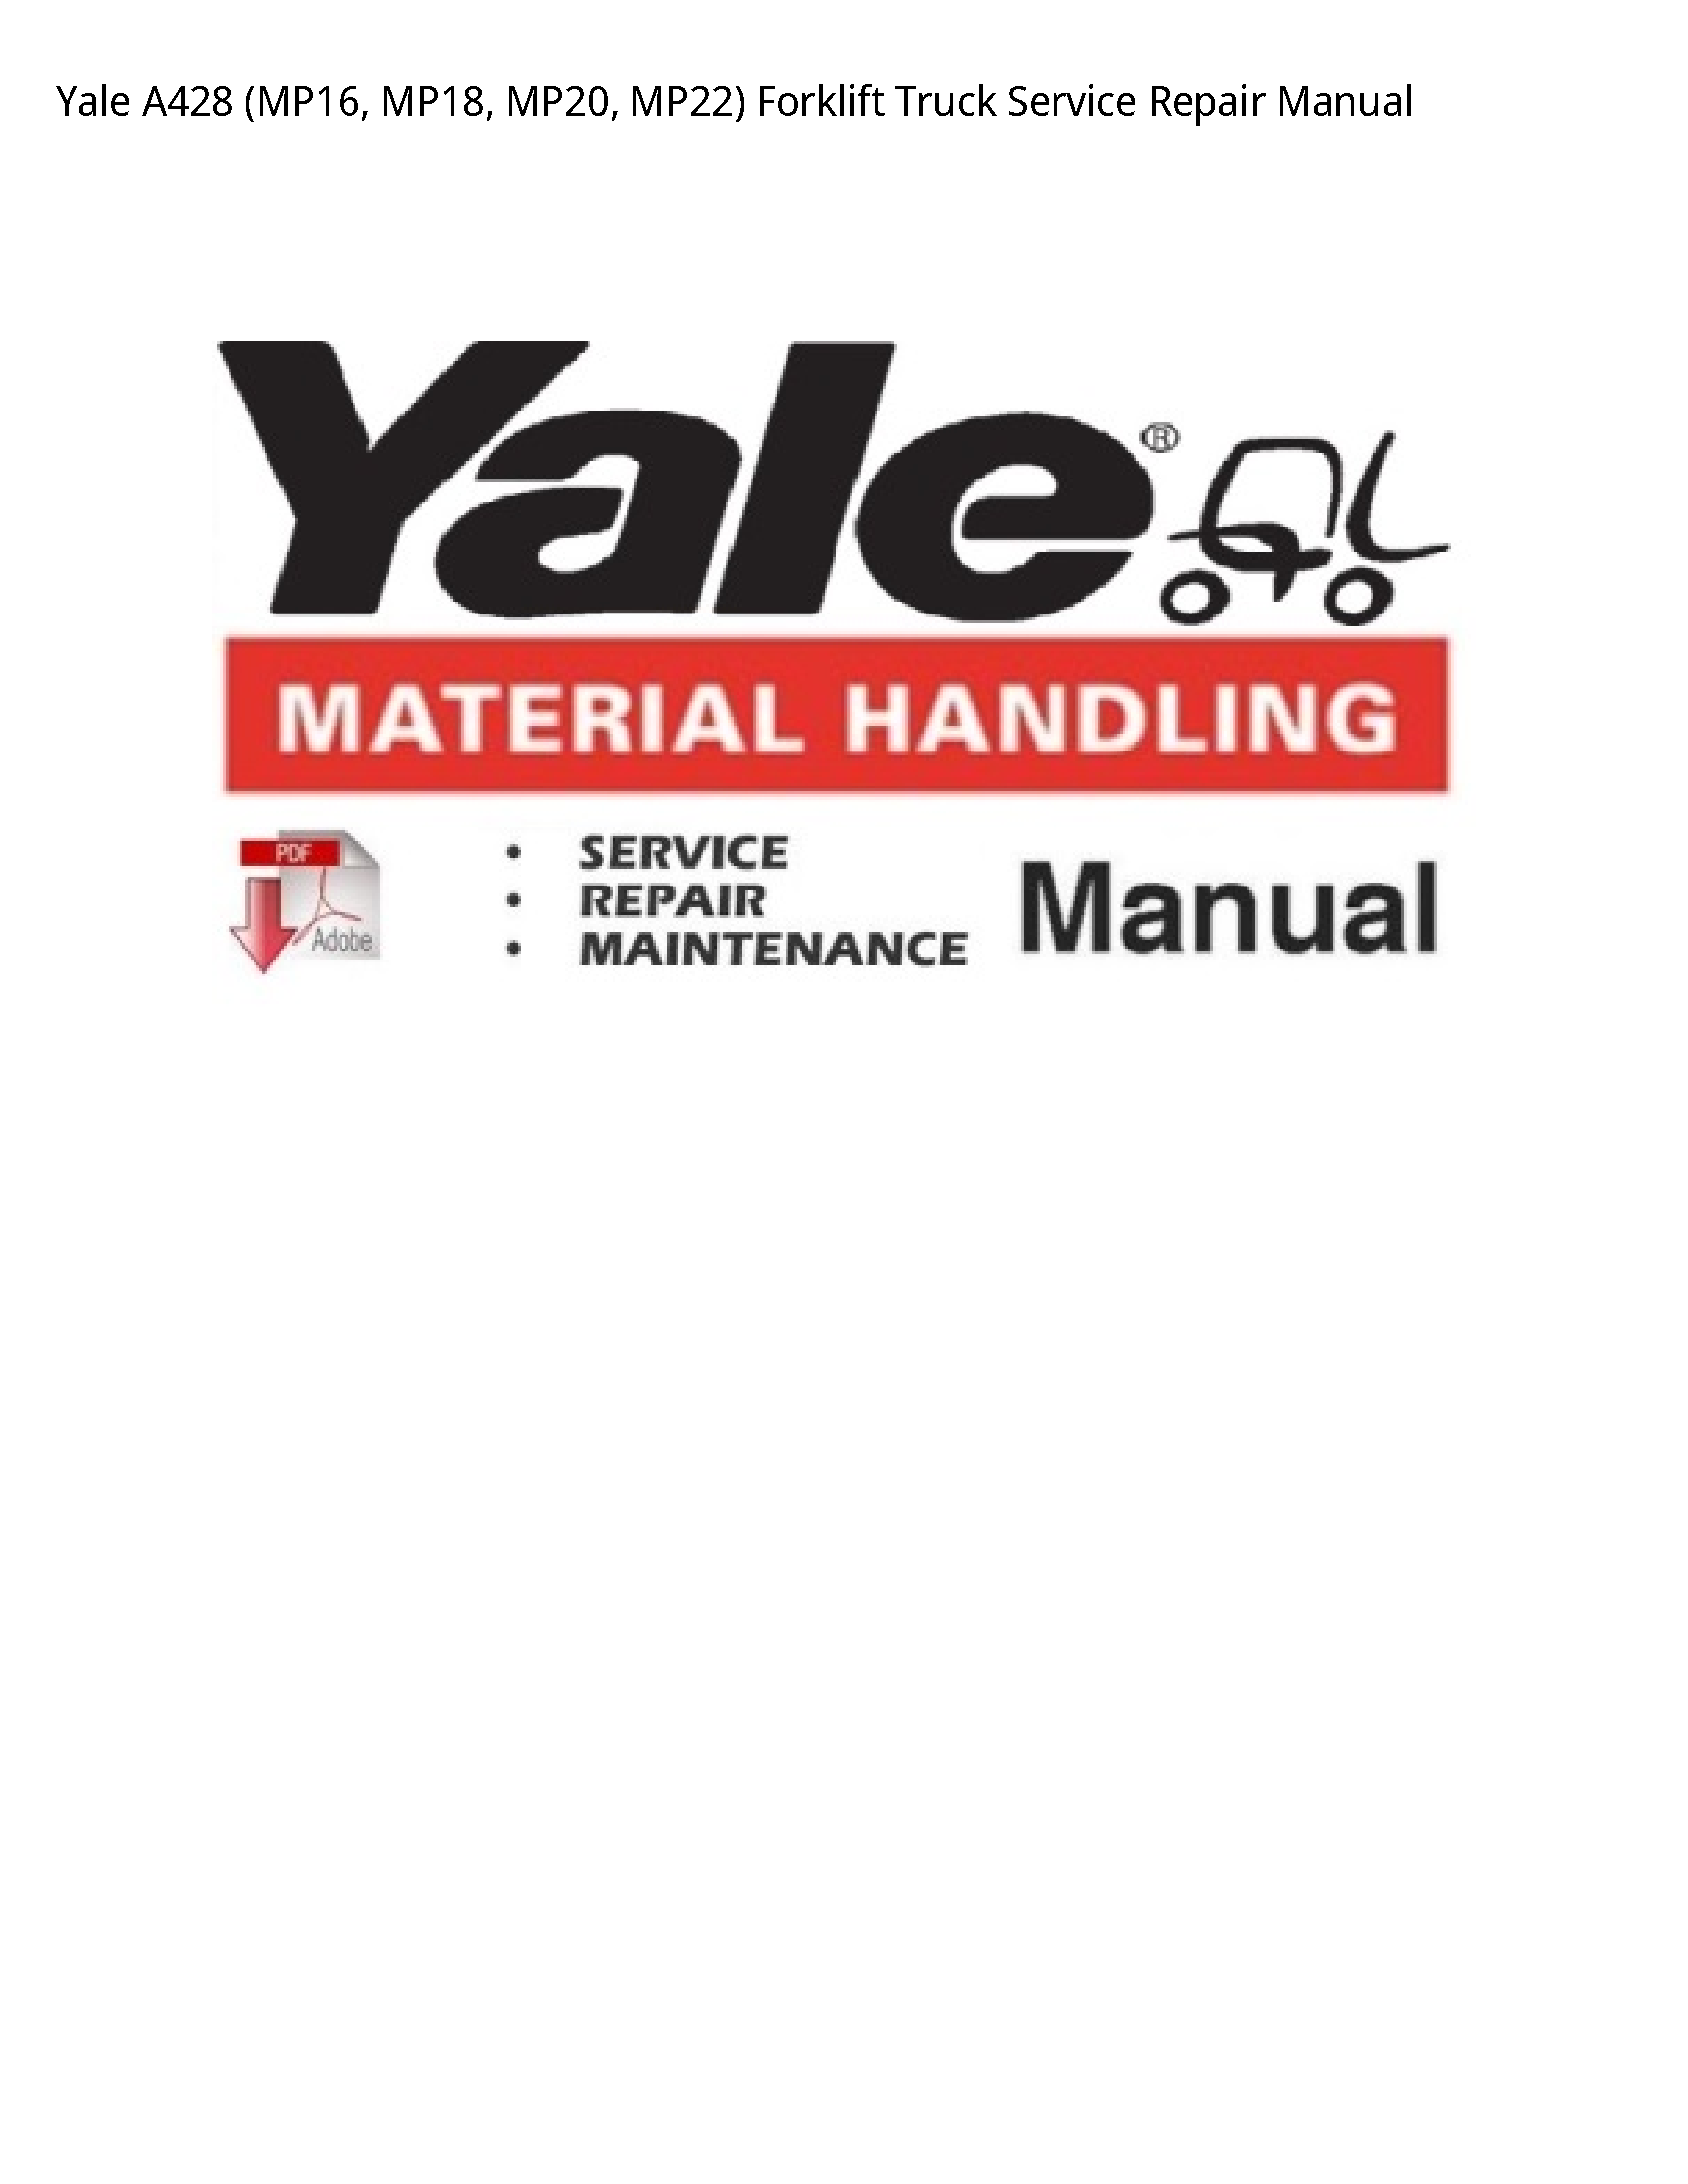 Yale A428 Forklift Truck manual